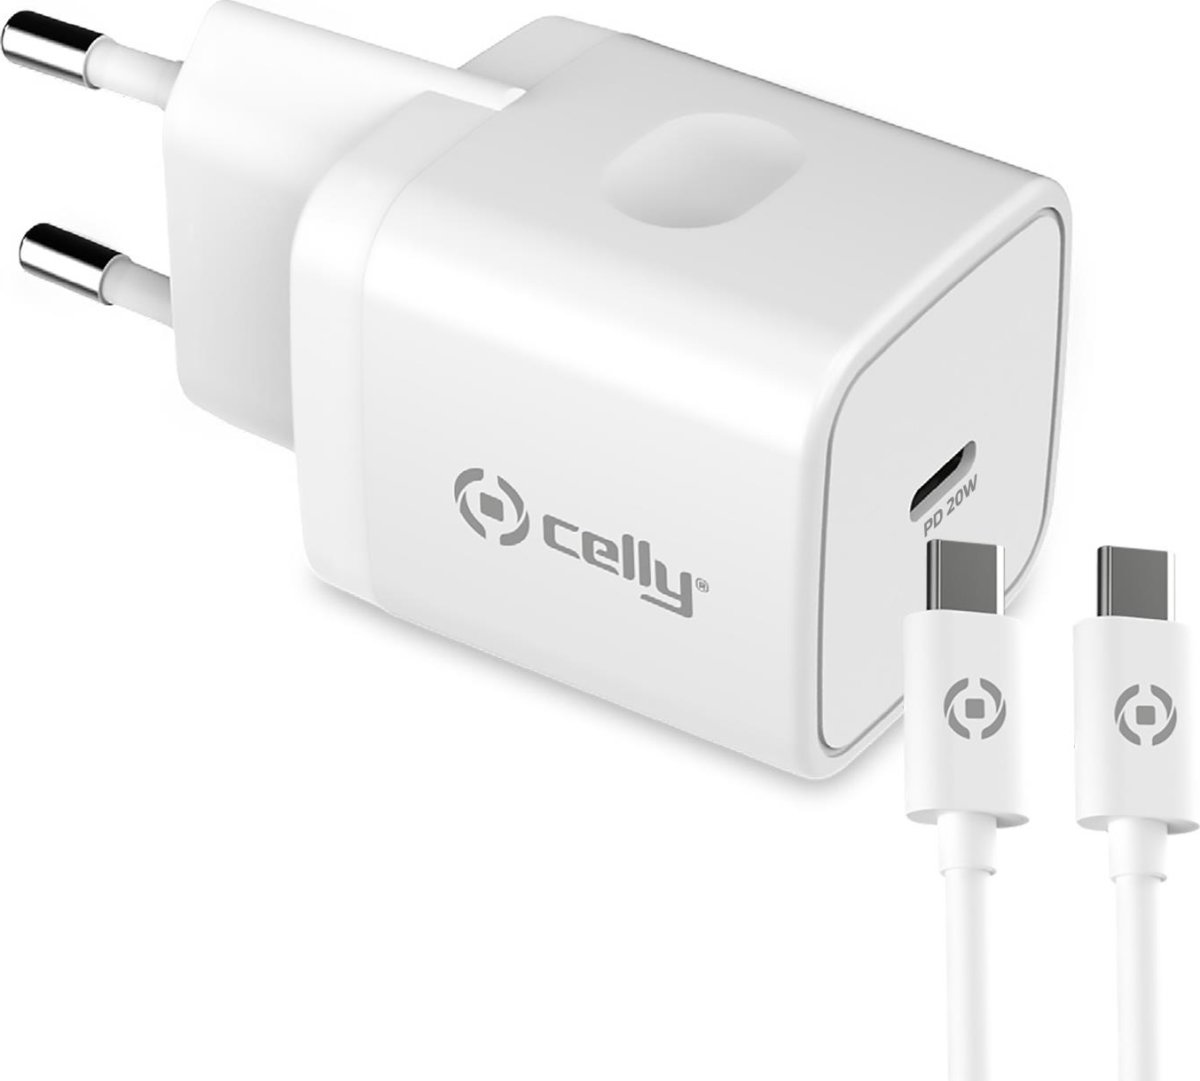 Celly ProPower 20W USB-C oplader